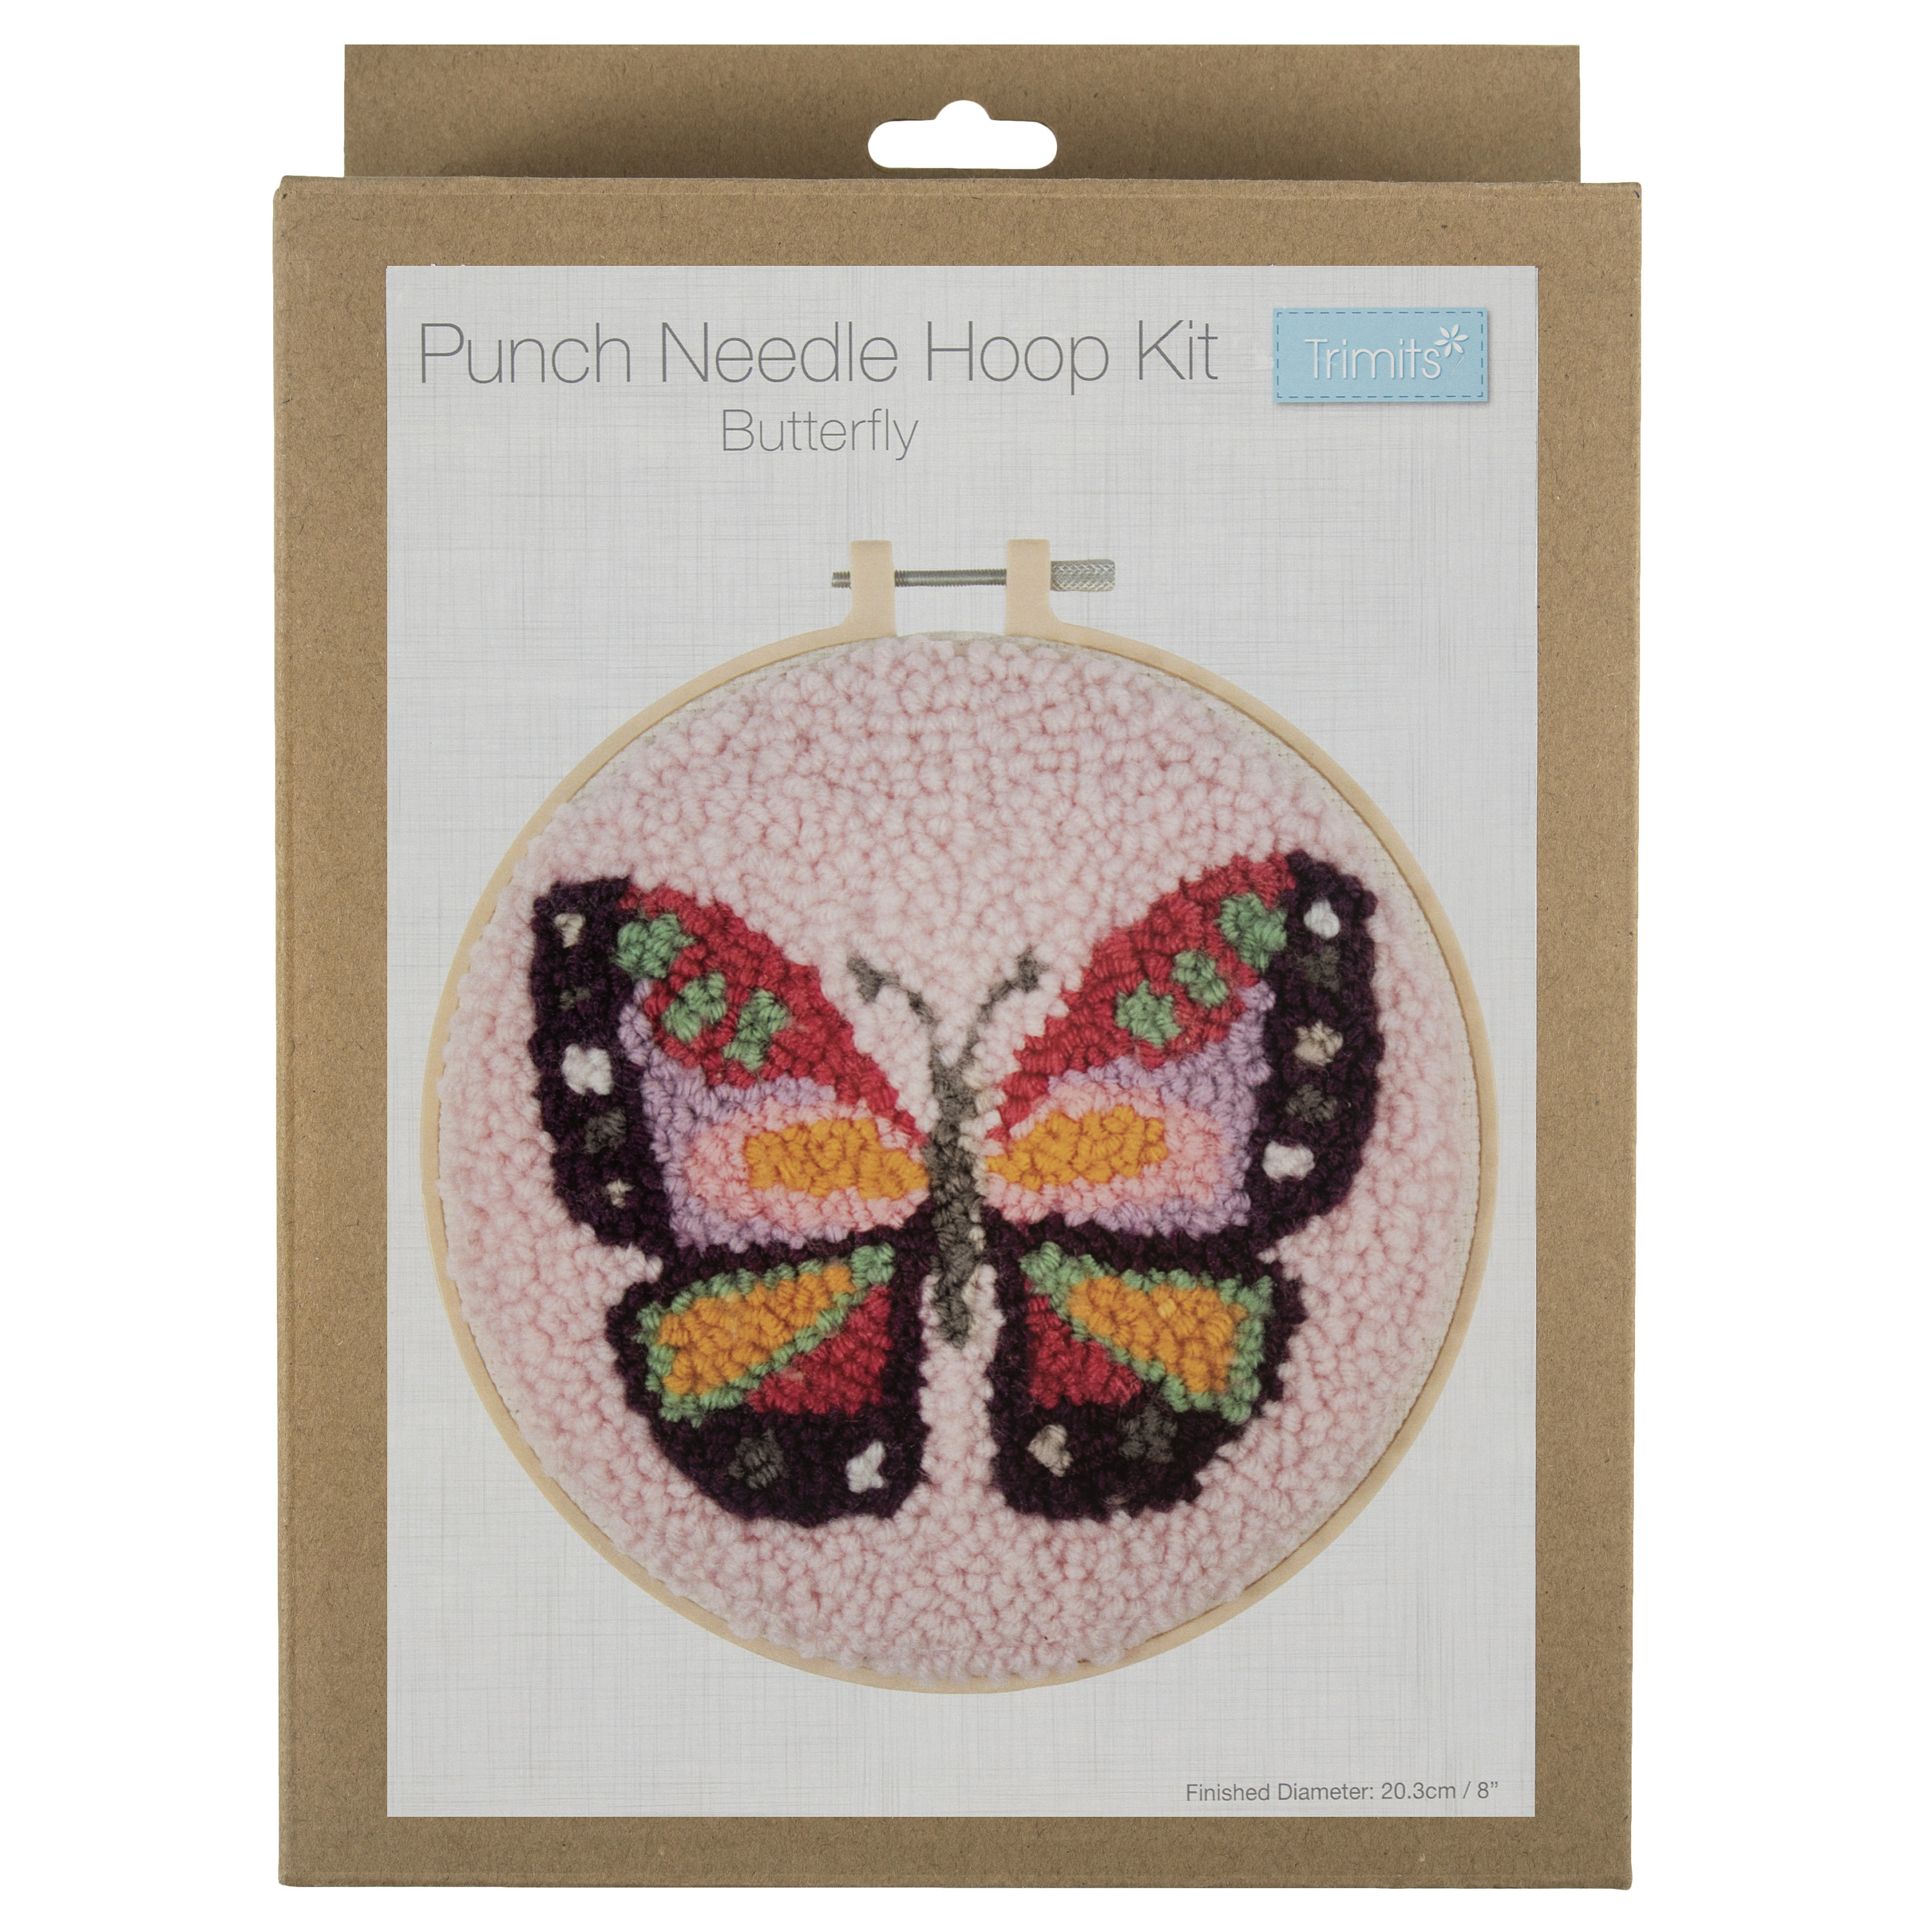 Punch Needle Kit for Beginners. Punch Needle. Punch Needle UK. Lavor Punch  Needle. Punch Needle Tools. Craft Kit. Make Your Own Kit. 